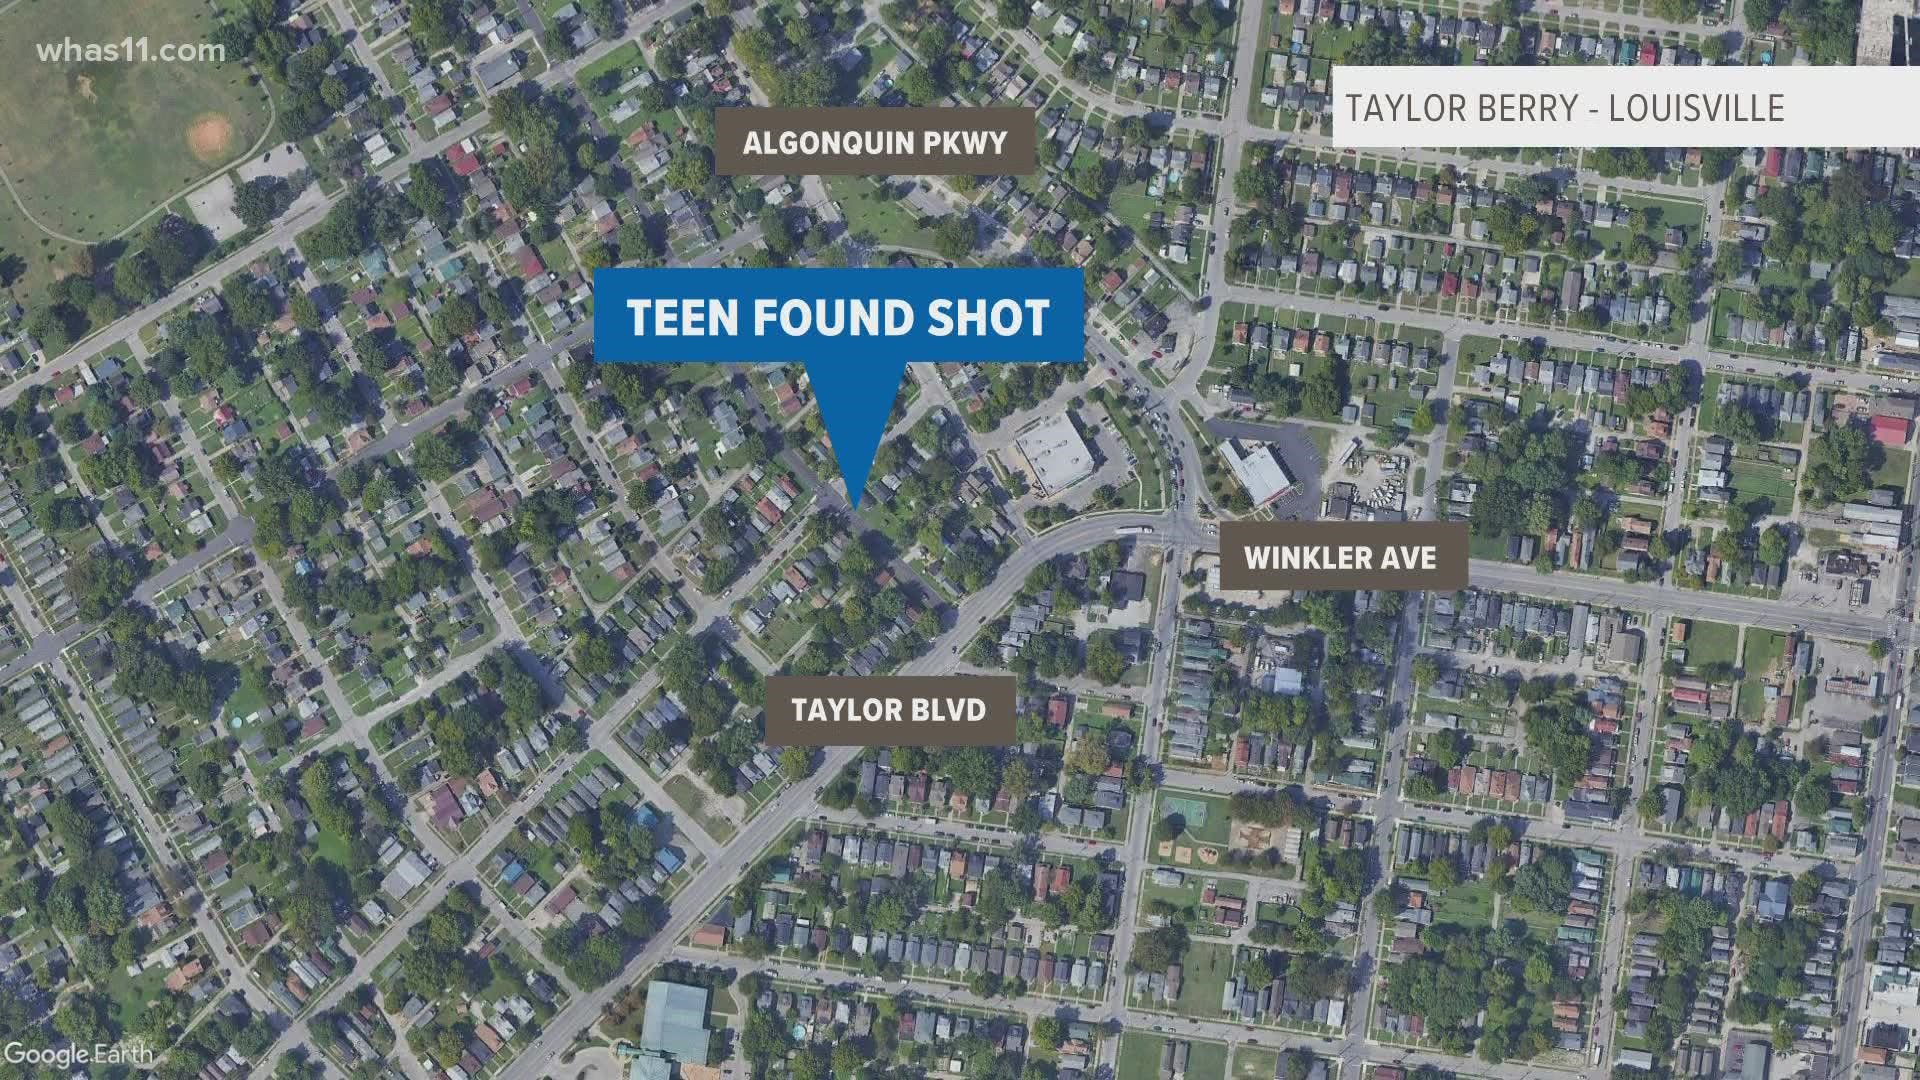 Police said a person believed to be in their mid to late teens was found shot in the 900 block of Euclid Avenue Saturday afternoon.